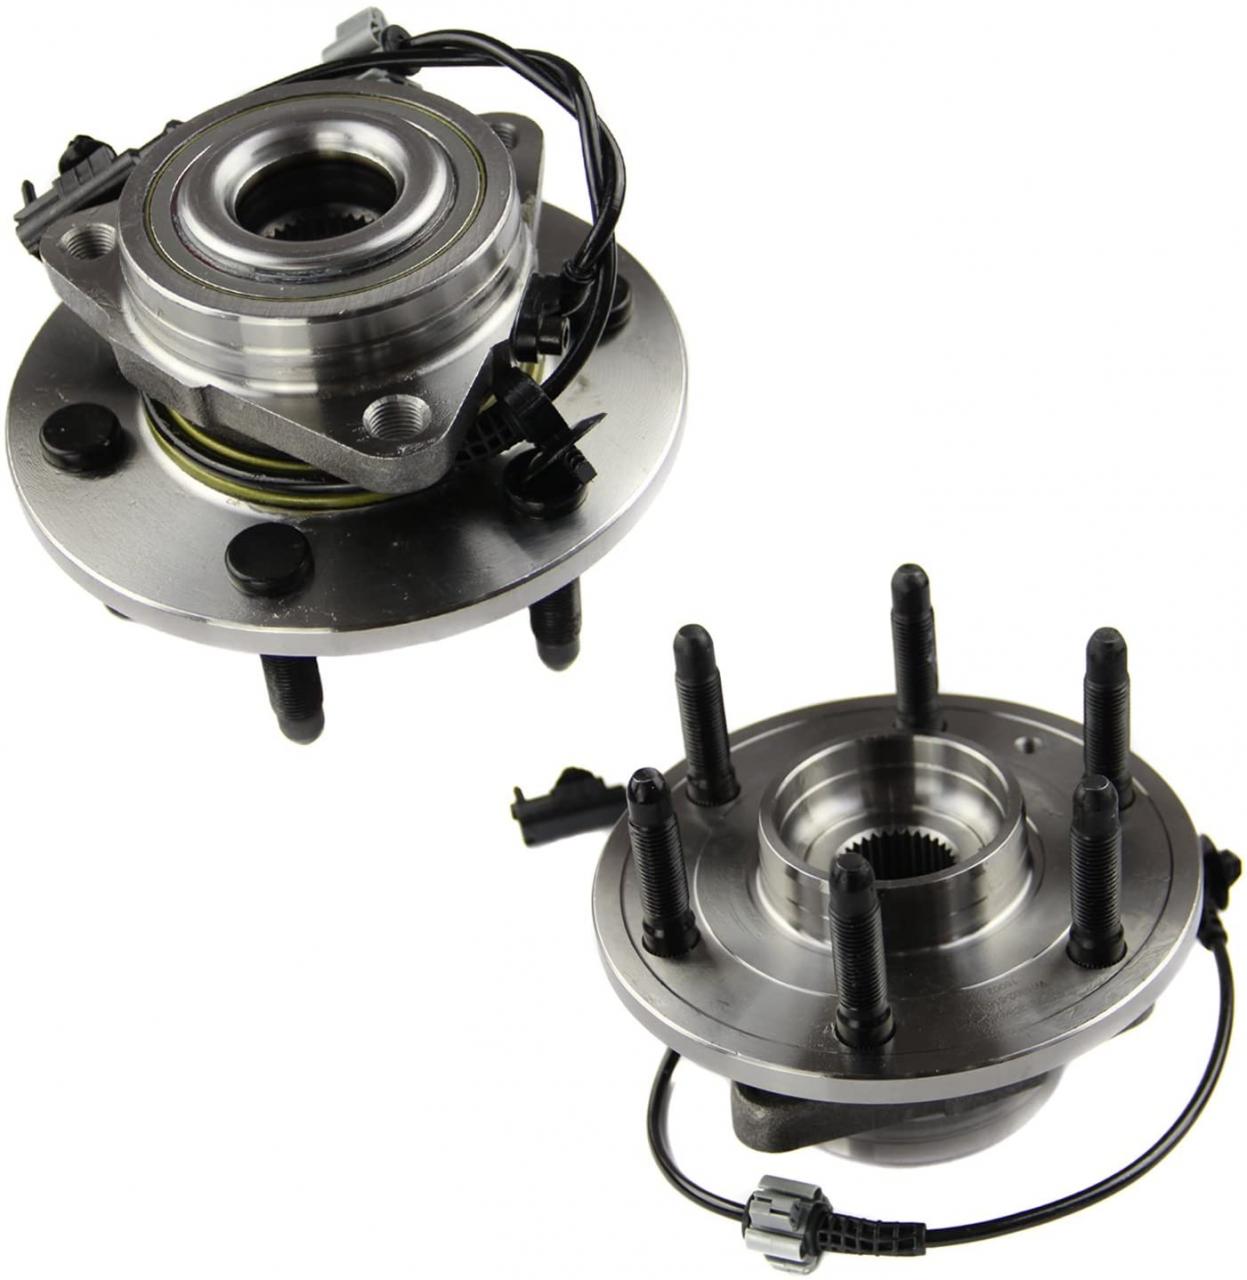 Buy MOTORMAN 515096 Front ABS Wheel Hub and Bearing Set - Both Left and  Right - Pair of 2 Online in Turkey. B018HVSI3Y